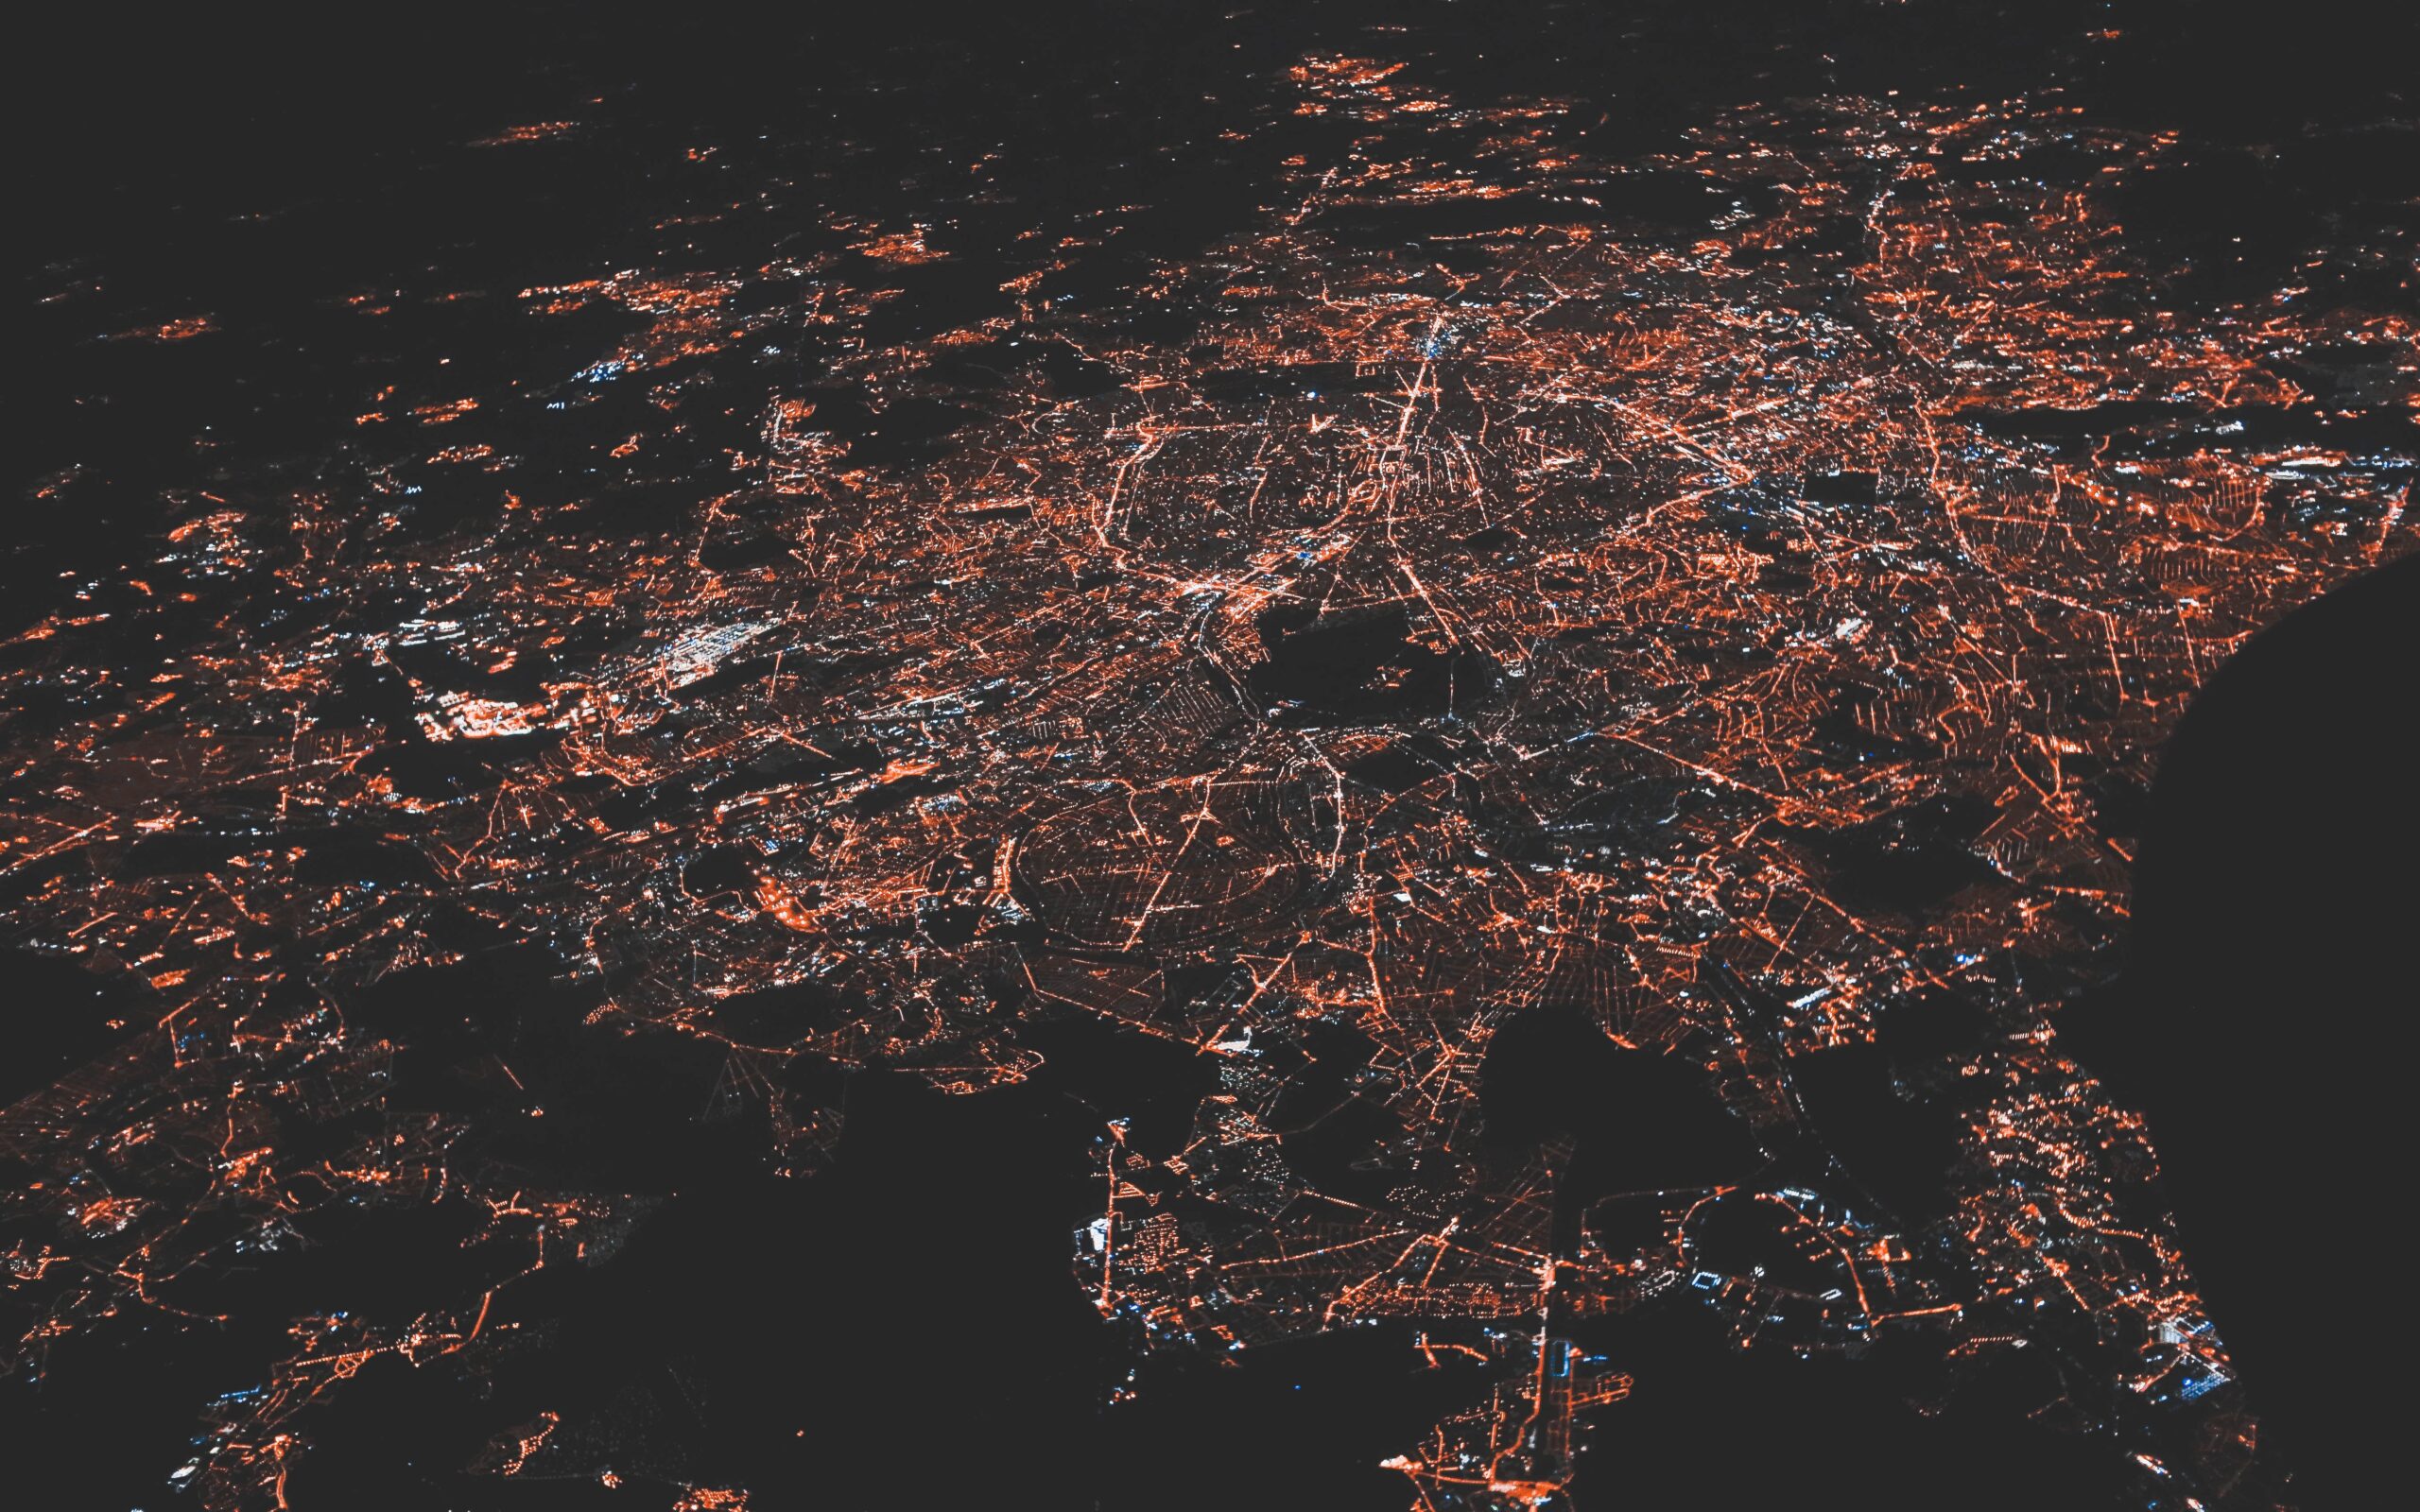 Nighttime aerial image showing ambient light over an unknown area.